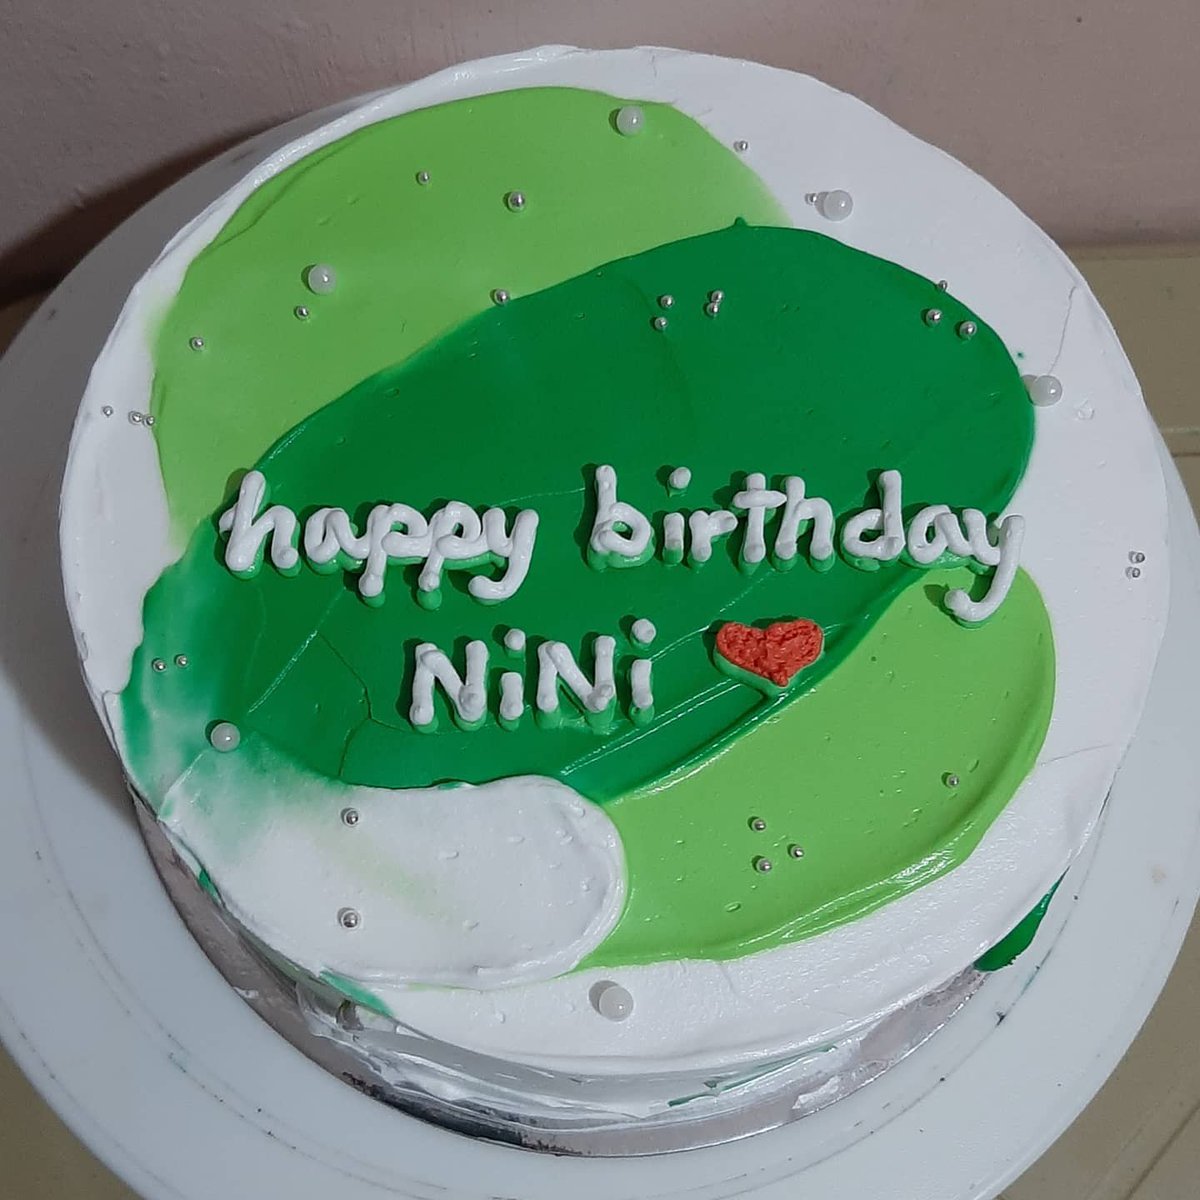 Dear Nini @NiniYmz Warmest wishes to you on your very special day. I hope that you continue to change the lives of others with your positivity, love, and beautiful spirit. Happy Birthday! ❤️